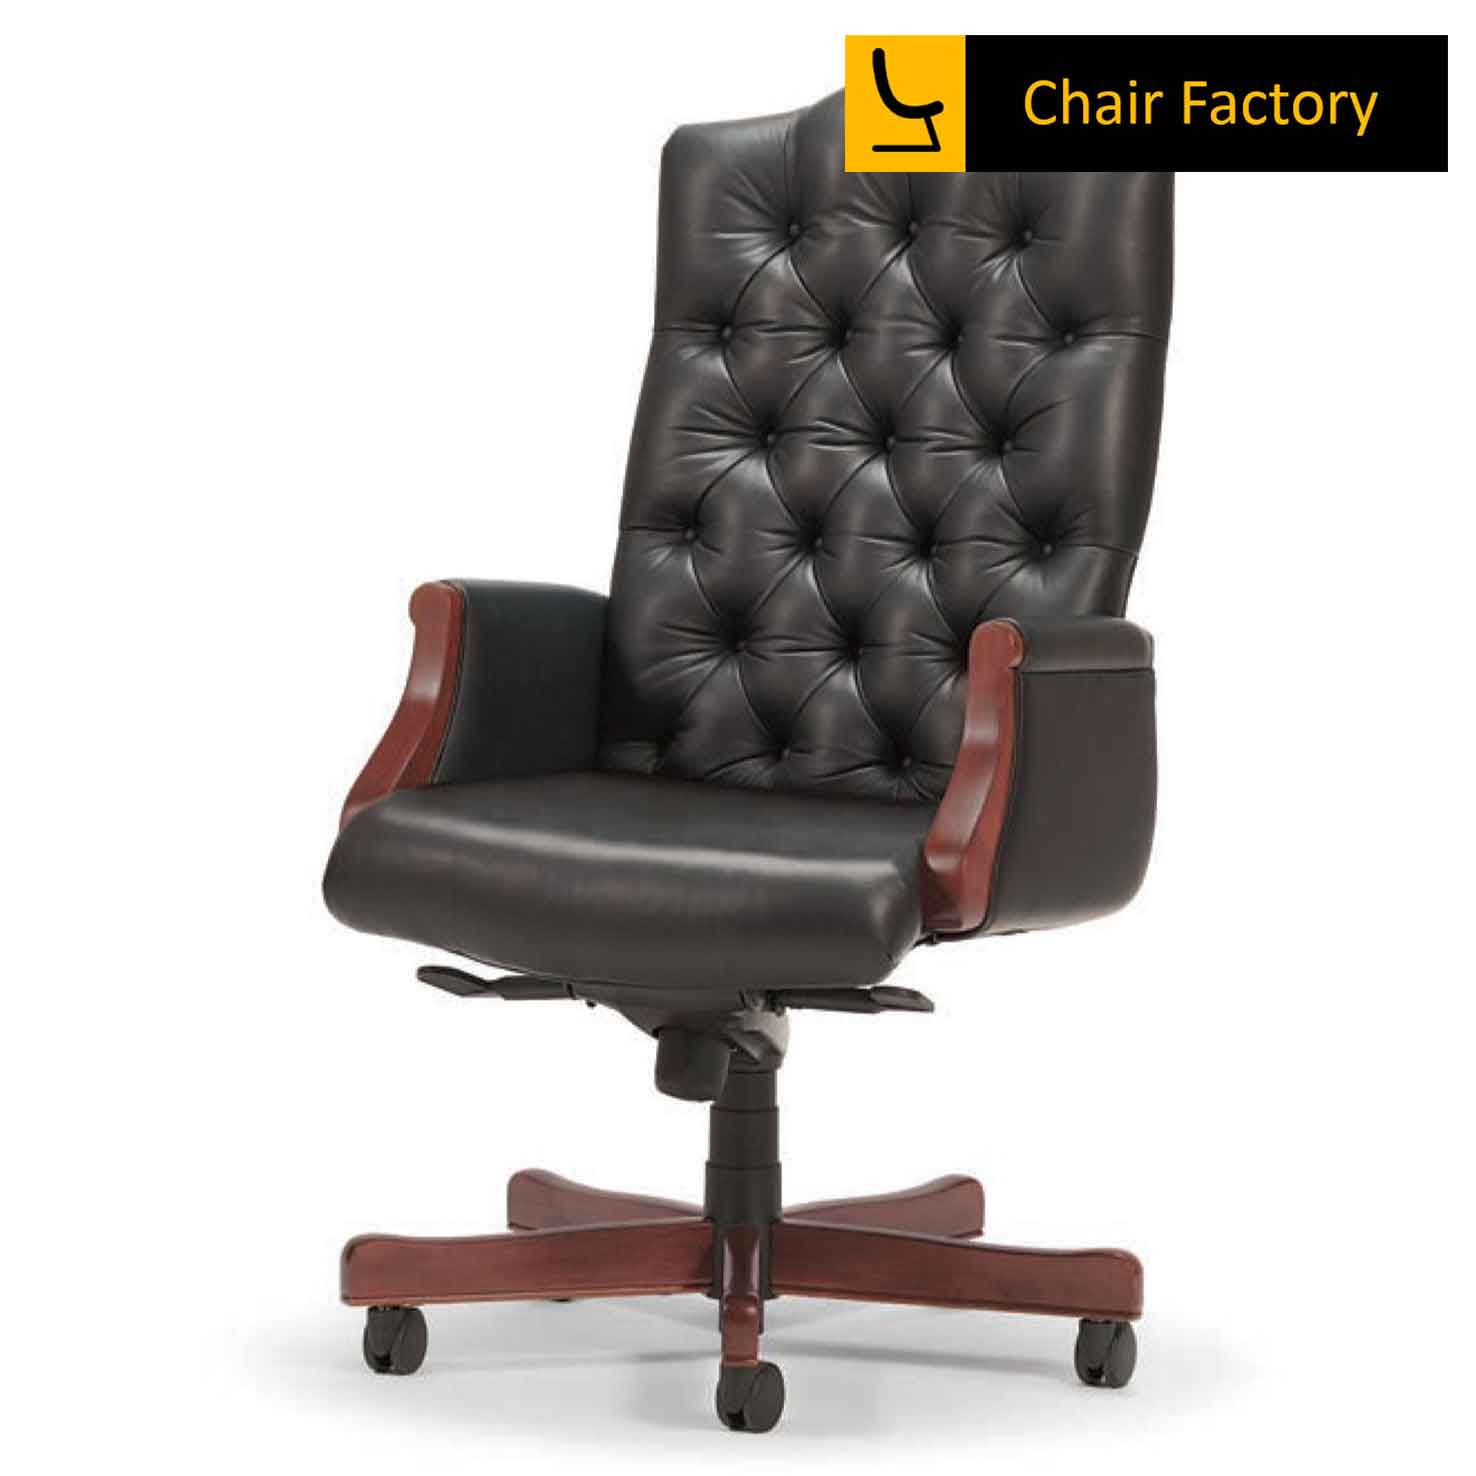 Wessex 100% Genuine Leather Chair